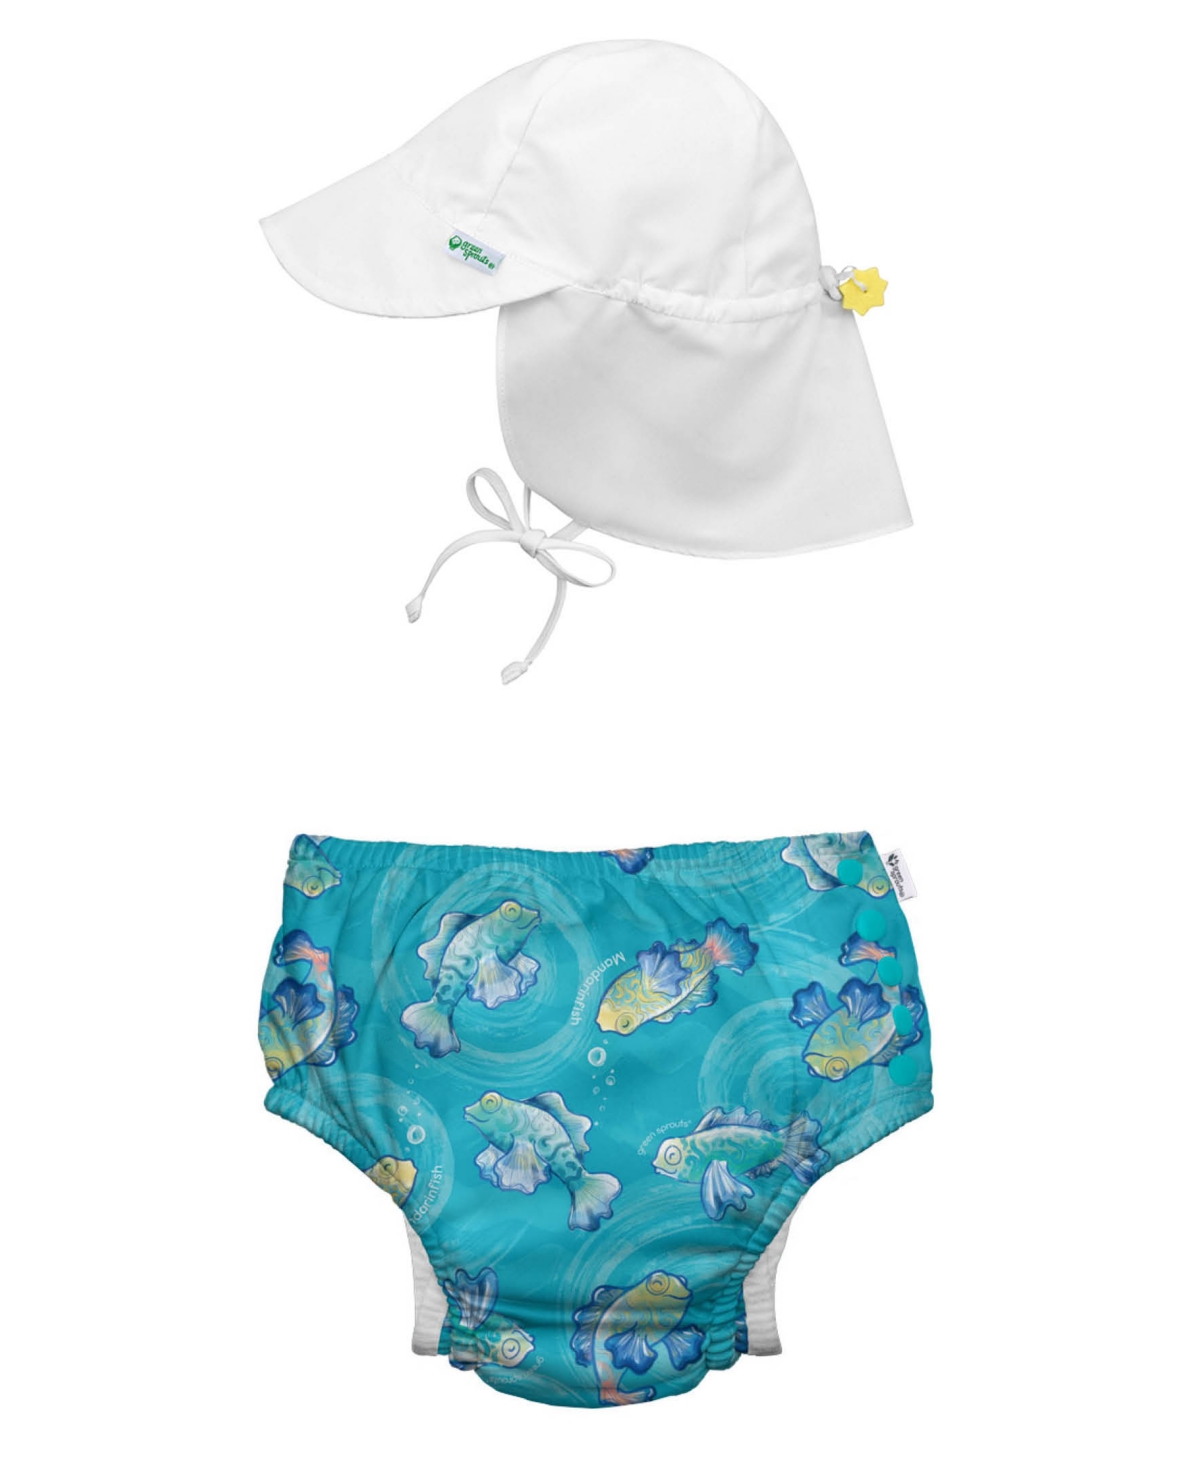 Green Sprouts Baby Boys Or Baby Girls Snap Swim Diaper And Flap Hat, 2 Piece Set In Aqua Mandarin Fish